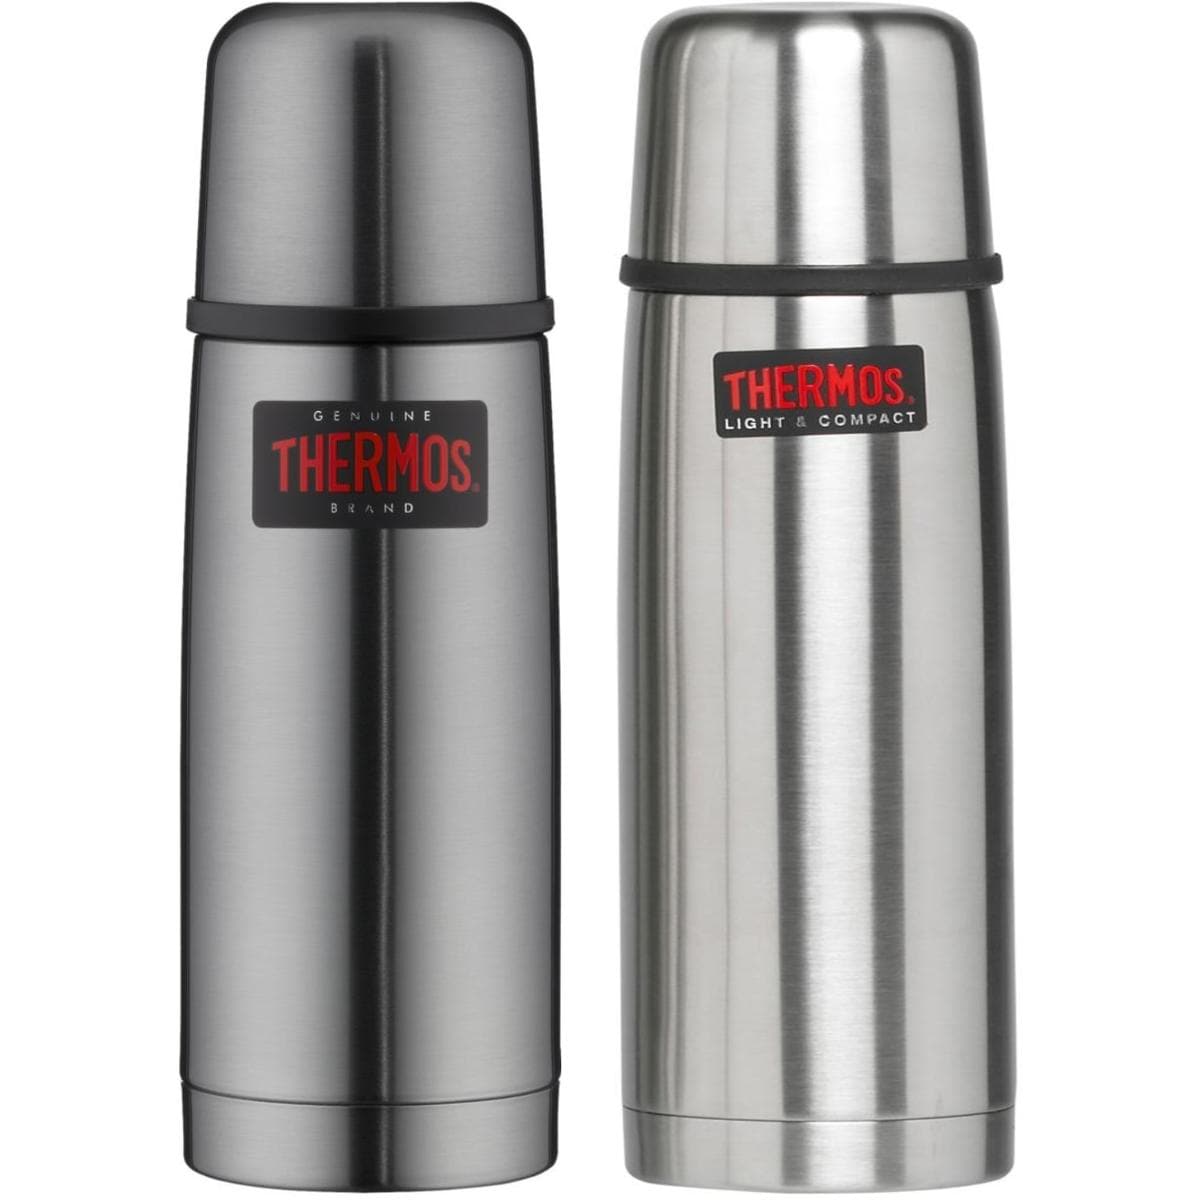 Wagner bei Thermosflasche & Thermos Compact Light Camping Campingzubehör